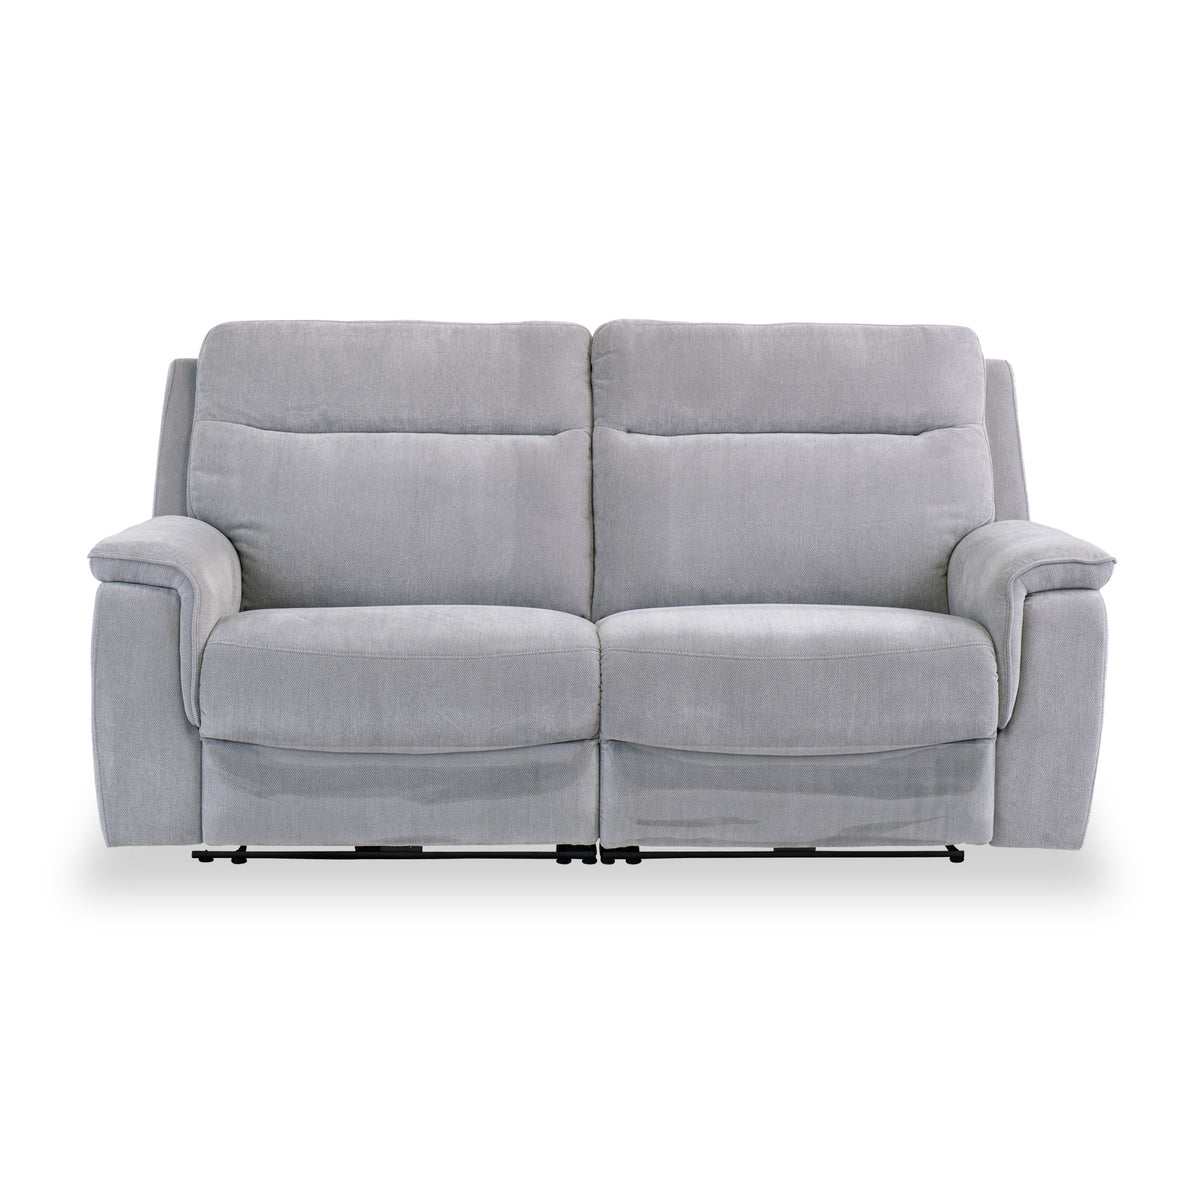 Weston Silver Grey Fabric Electric Reclining 3 Seater Sofa from Roseland Furniture